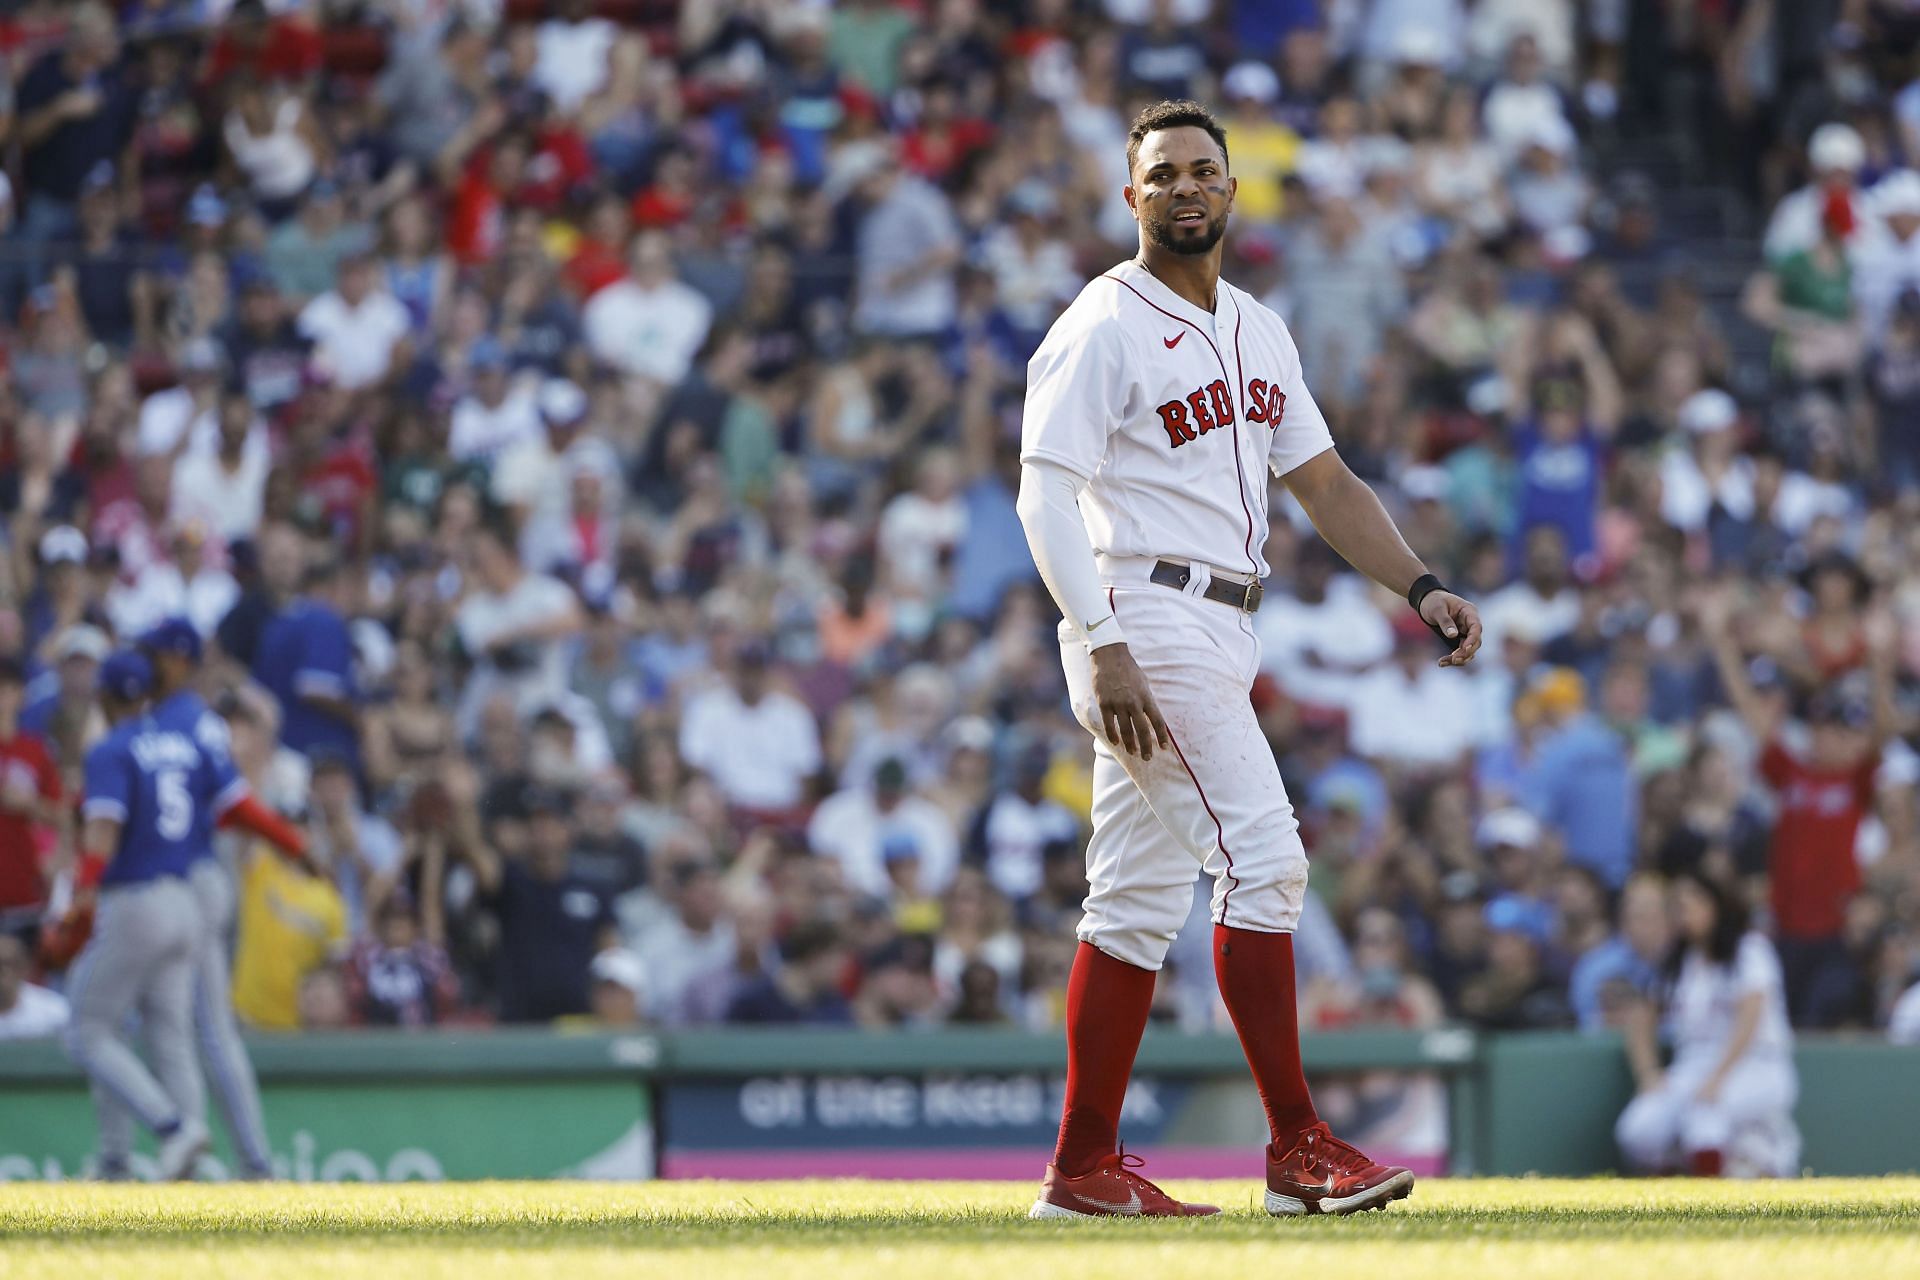 MLB insider predicted possible Red Sox trade deadline moves